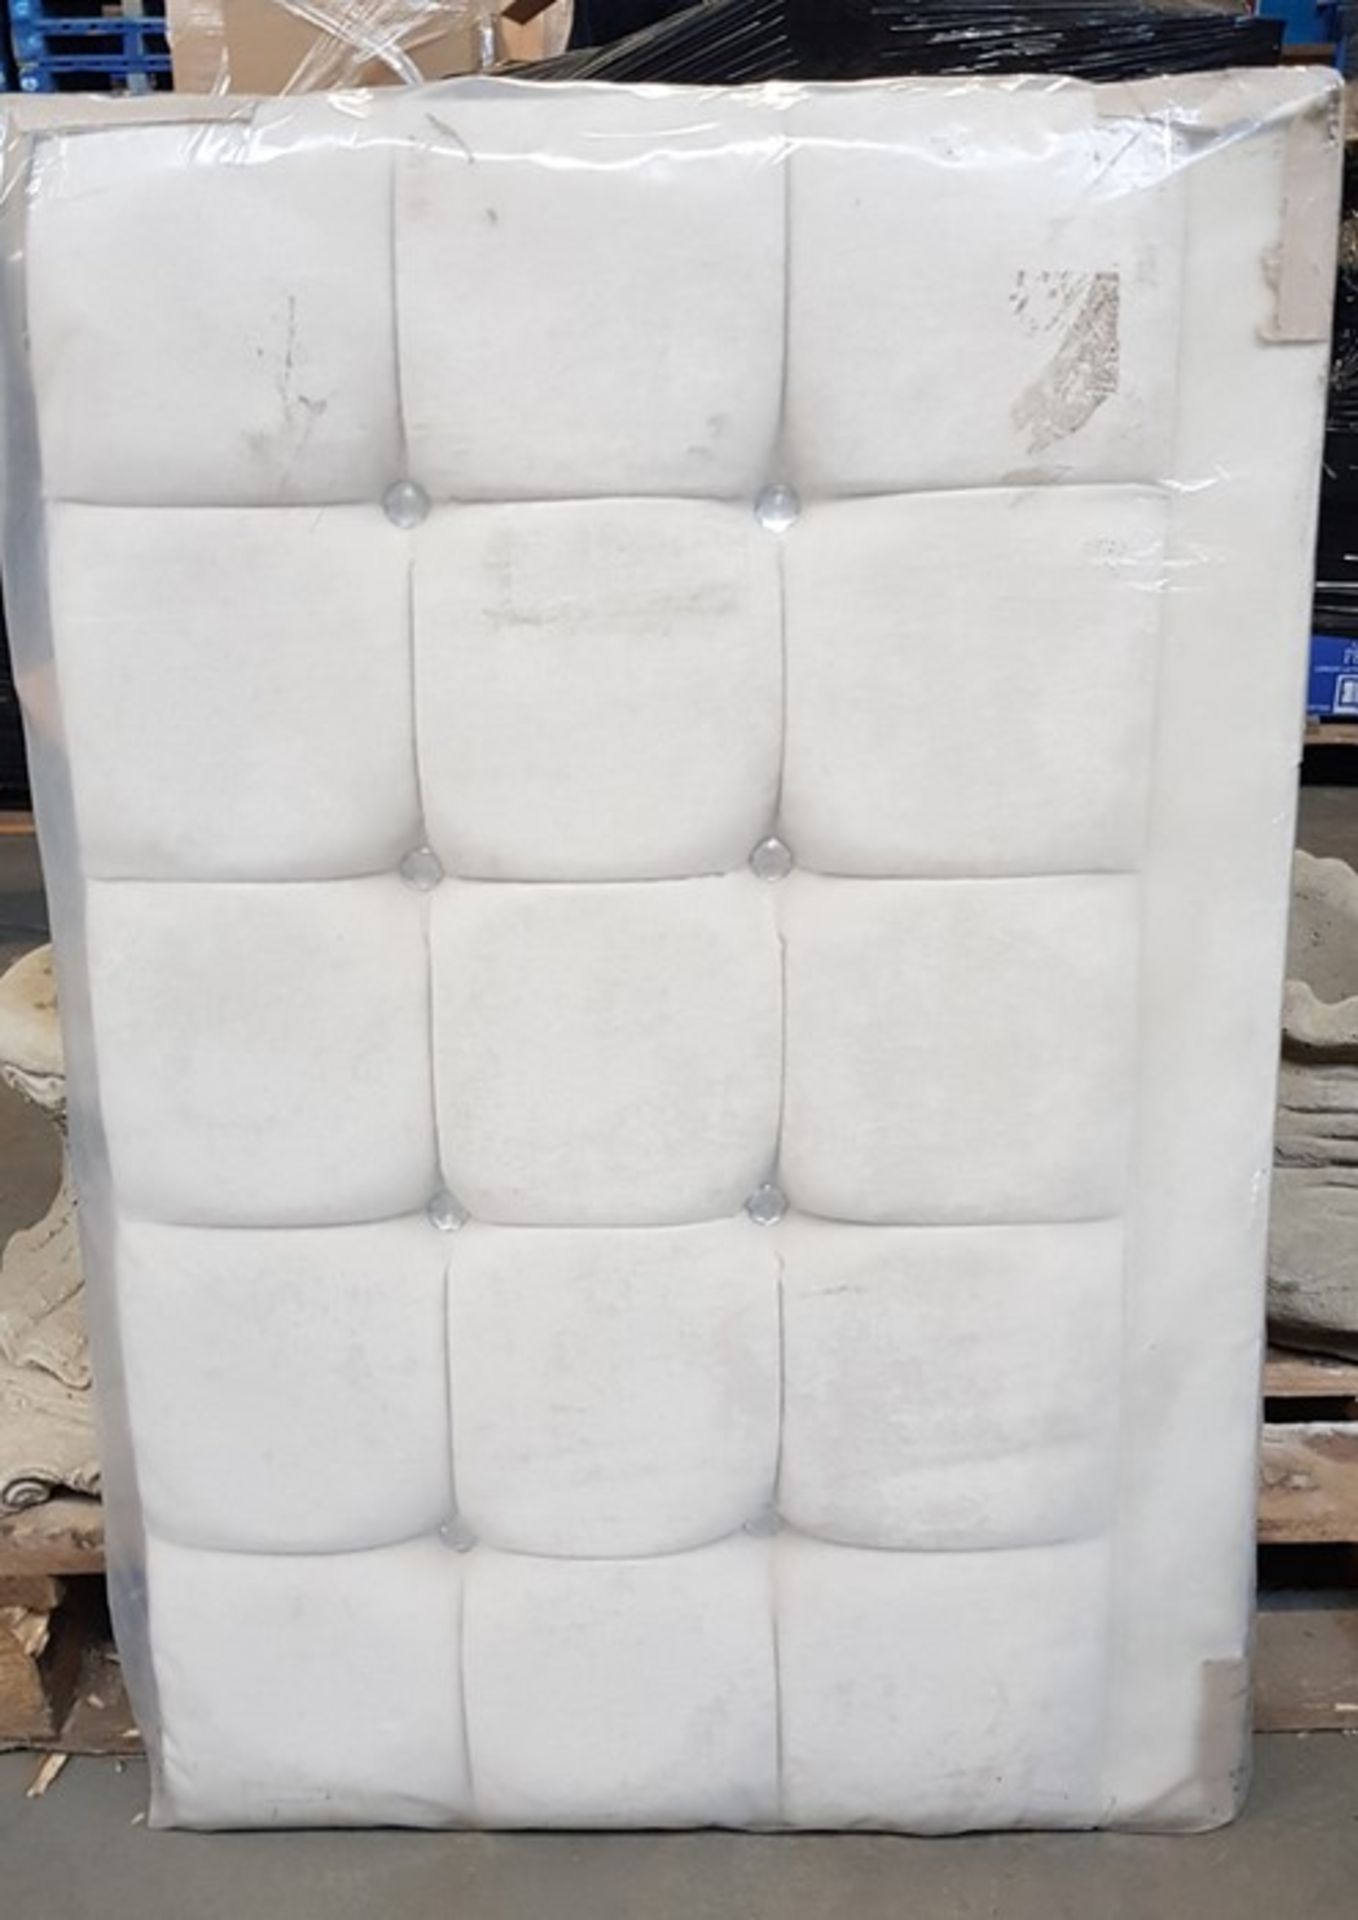 1 BAGGED 90CM SINGLE HEADBOARD IN WHITE / NEEDS A CLEAN / RRP £84.99 (PUBLIC VIEWING AVAILABLE)